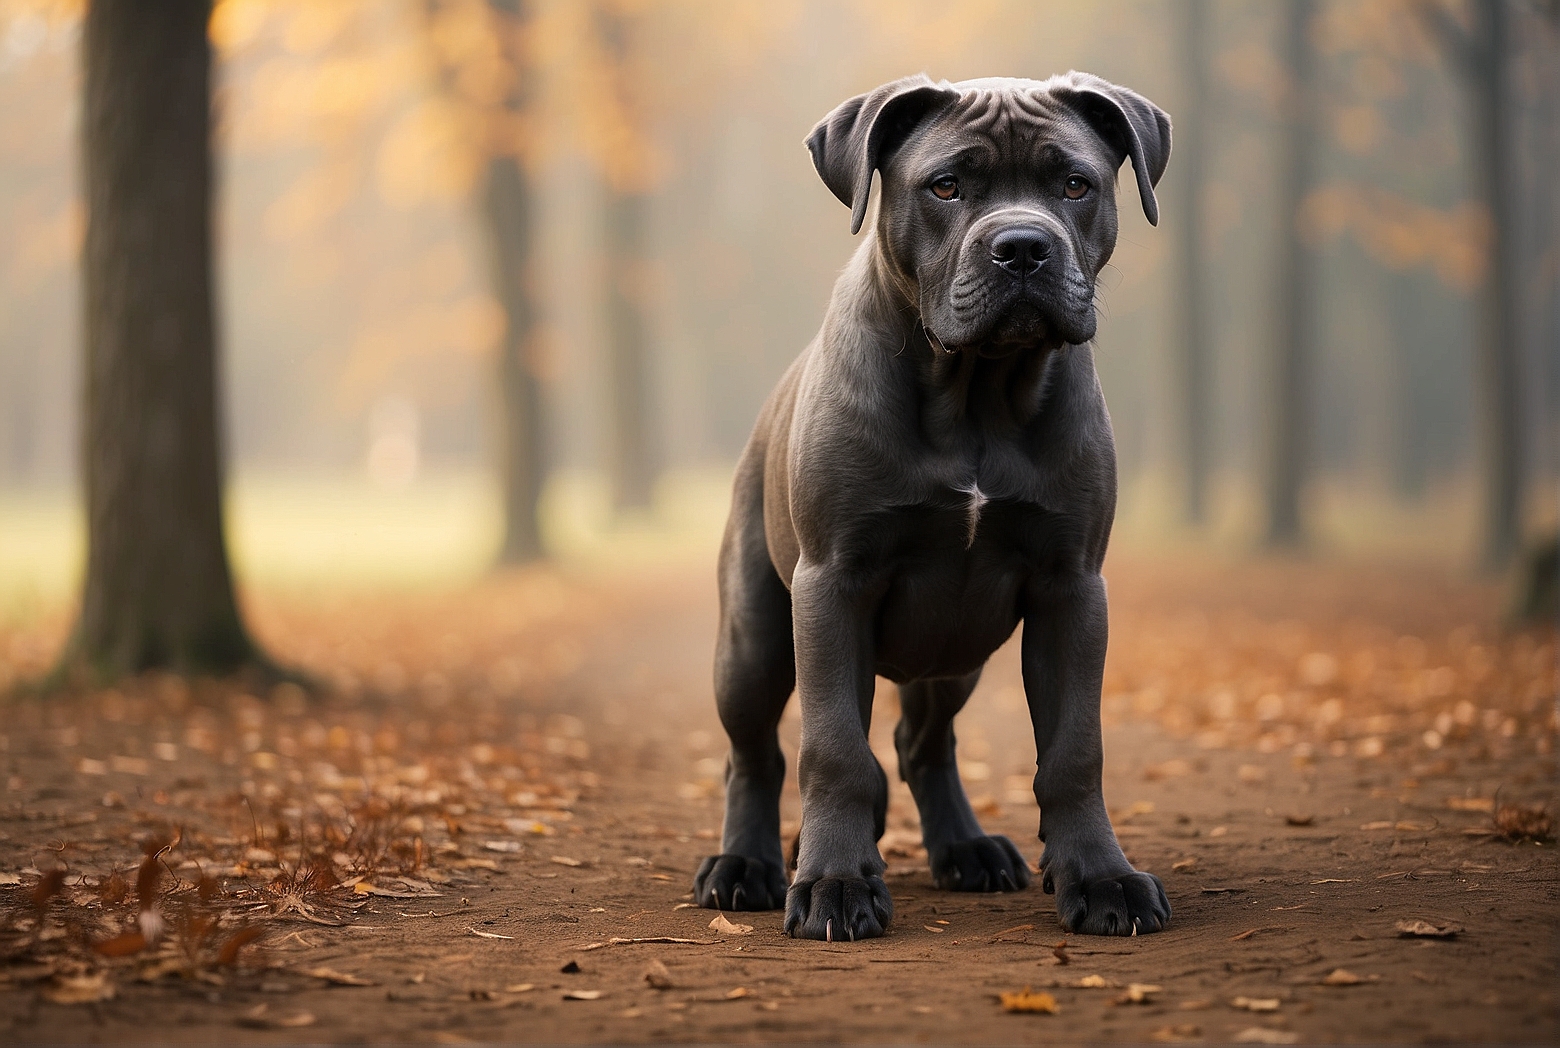 Why are Cane Corso breeds banned in certain areas?